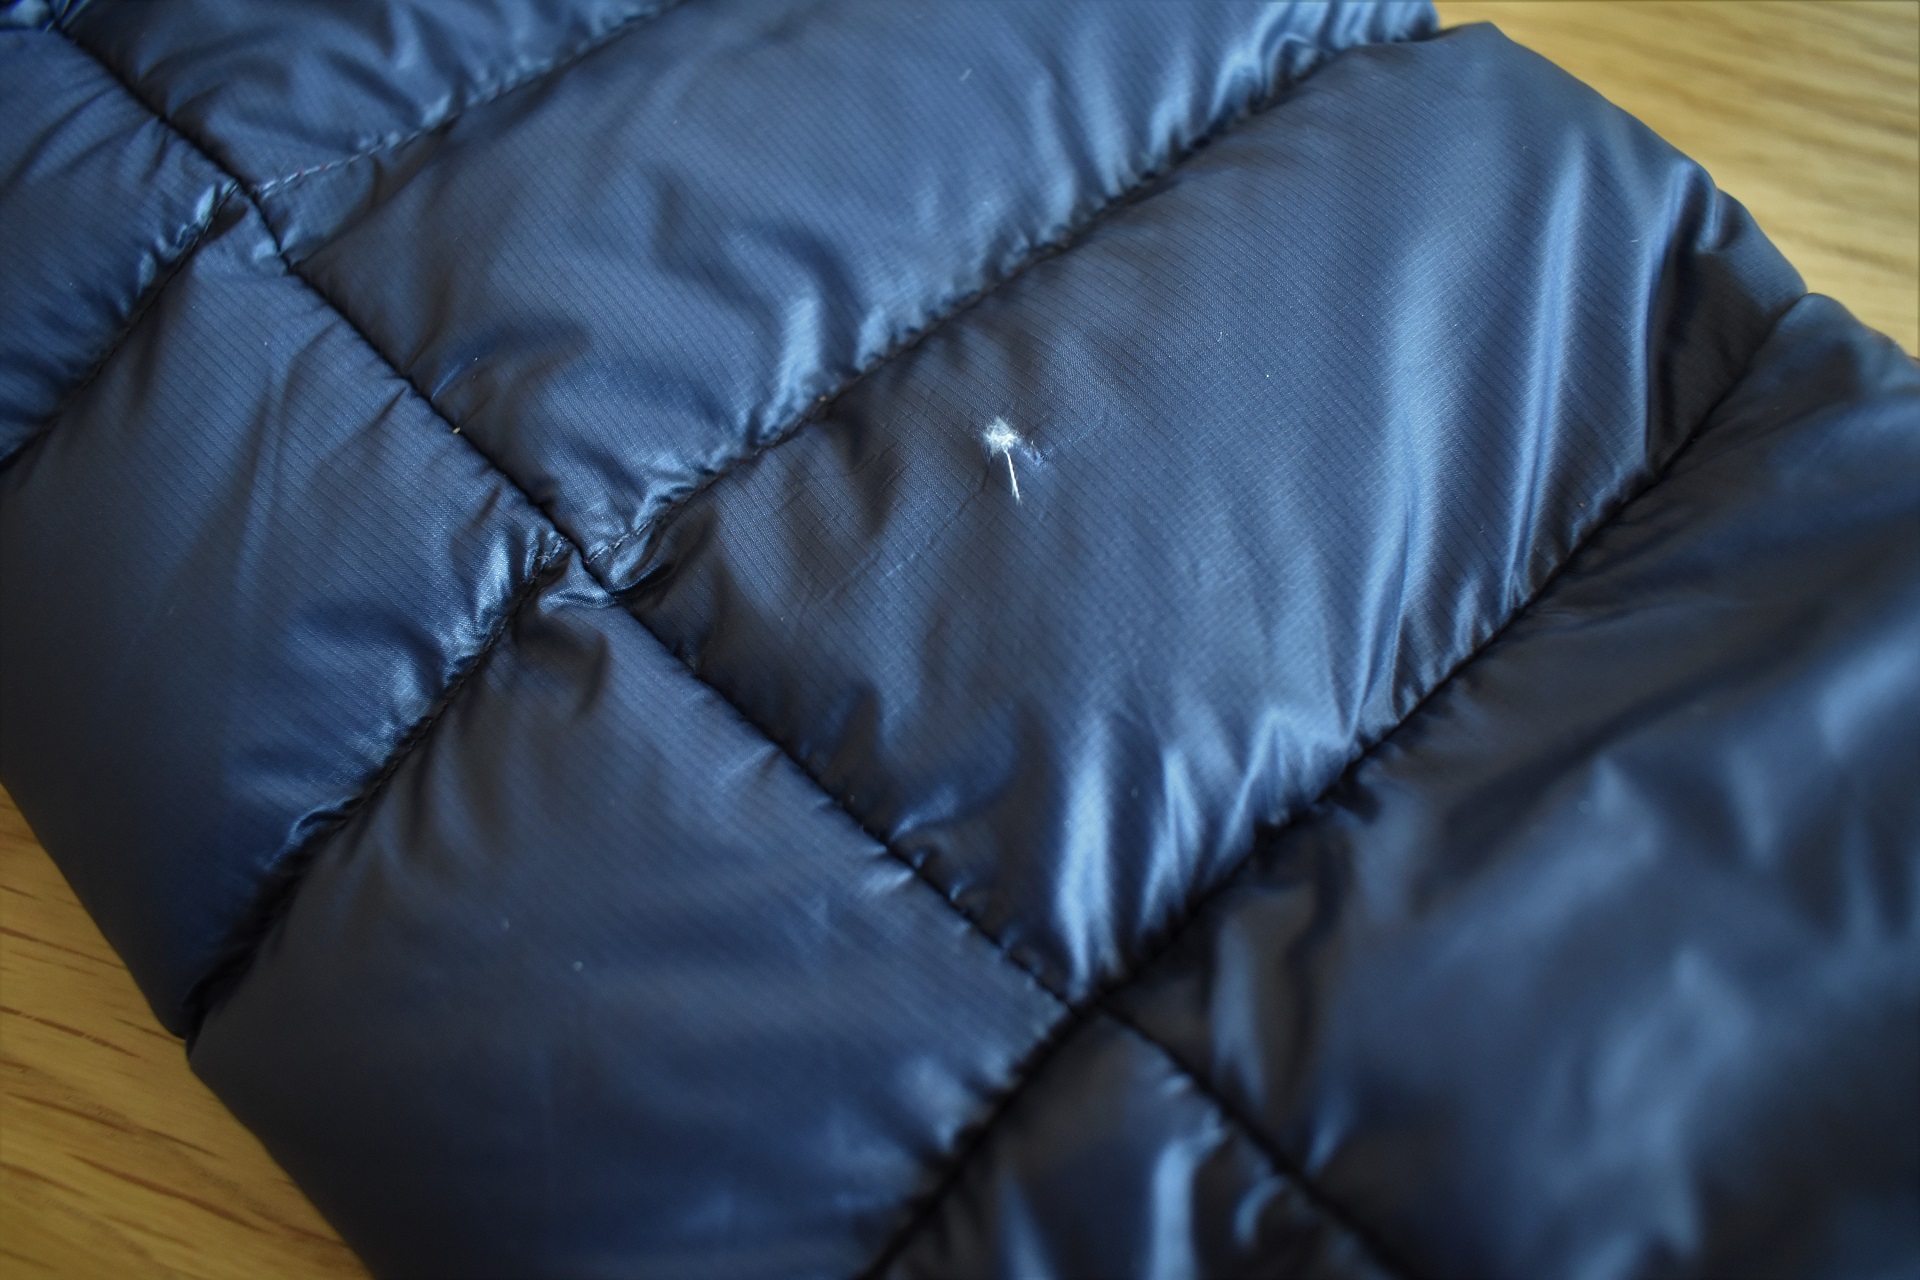 How To Fix A Hole In A Puffer Jacket